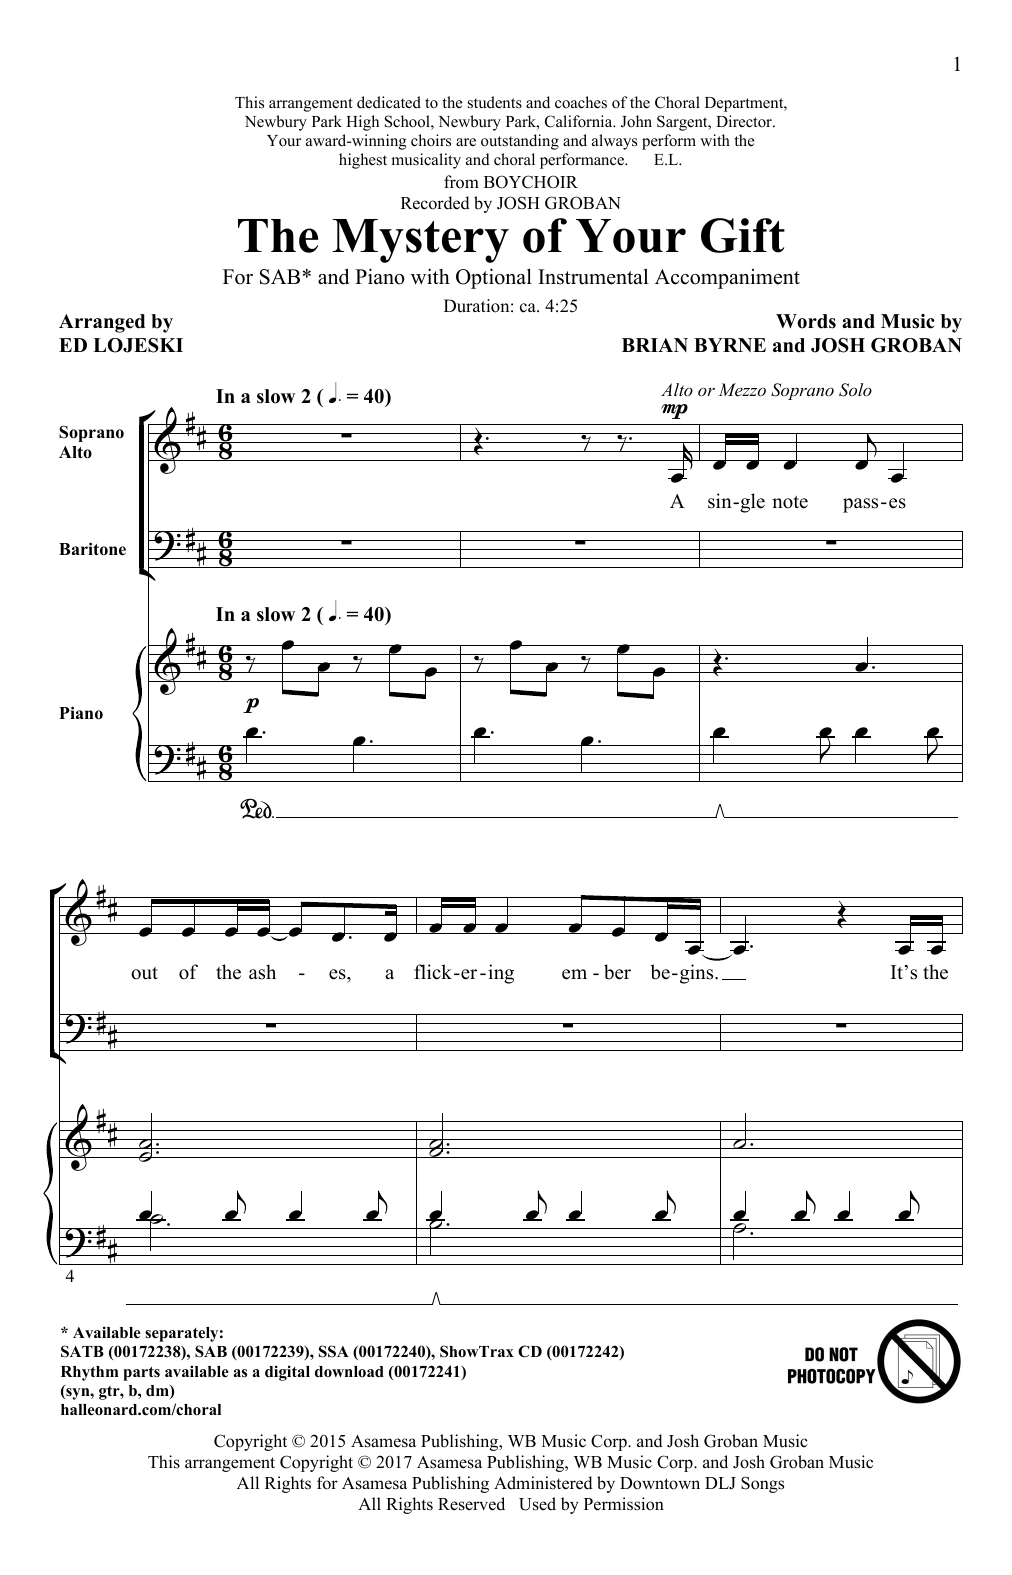 Download Ed Lojeski The Mystery Of Your Gift Sheet Music